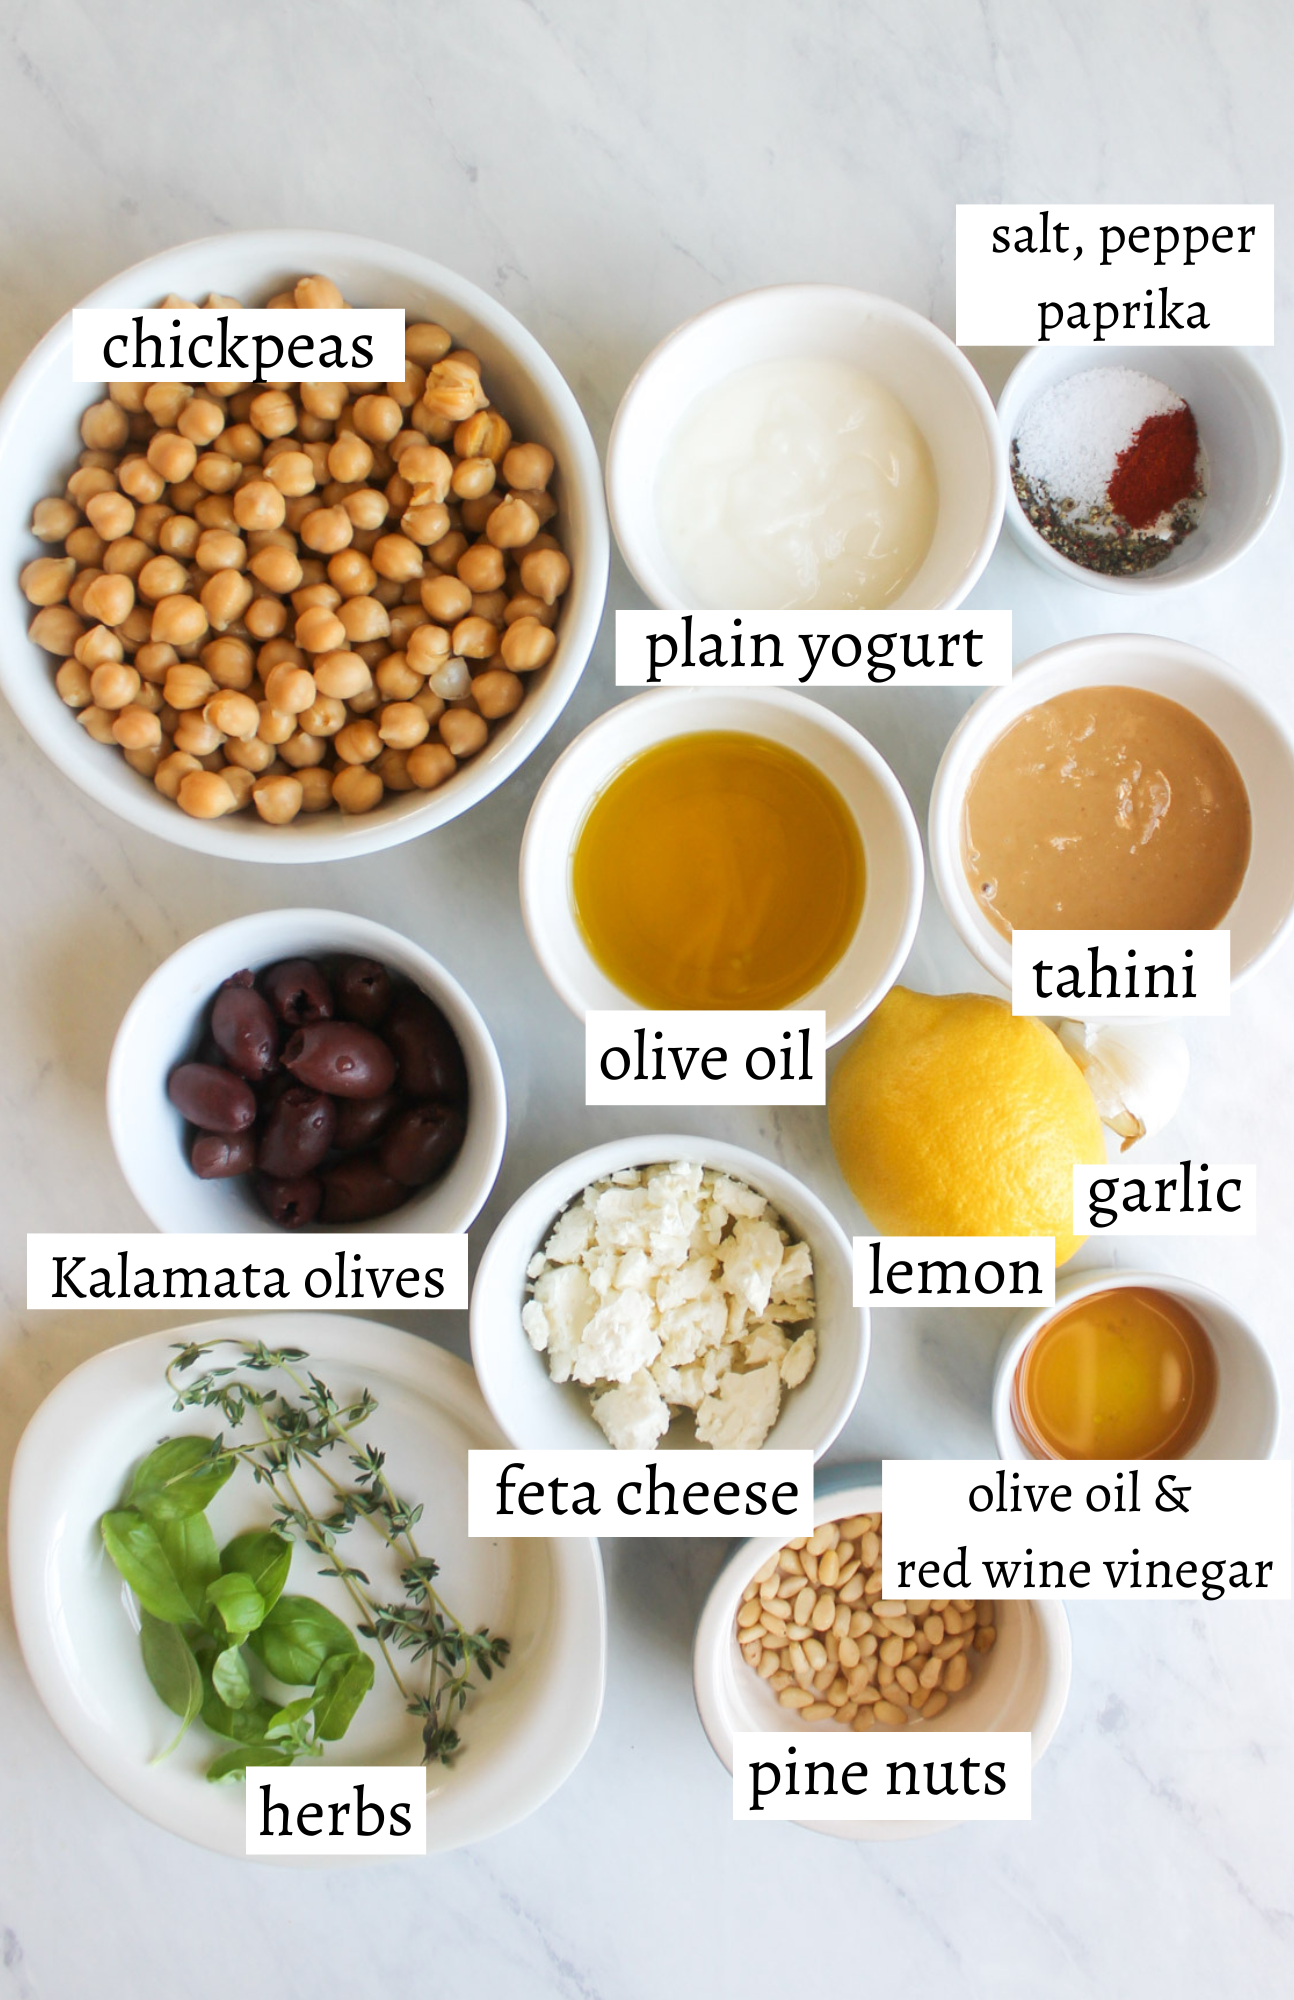 Labeled ingredients for Mediterranean Hummus with Olives and Feta Cheese.